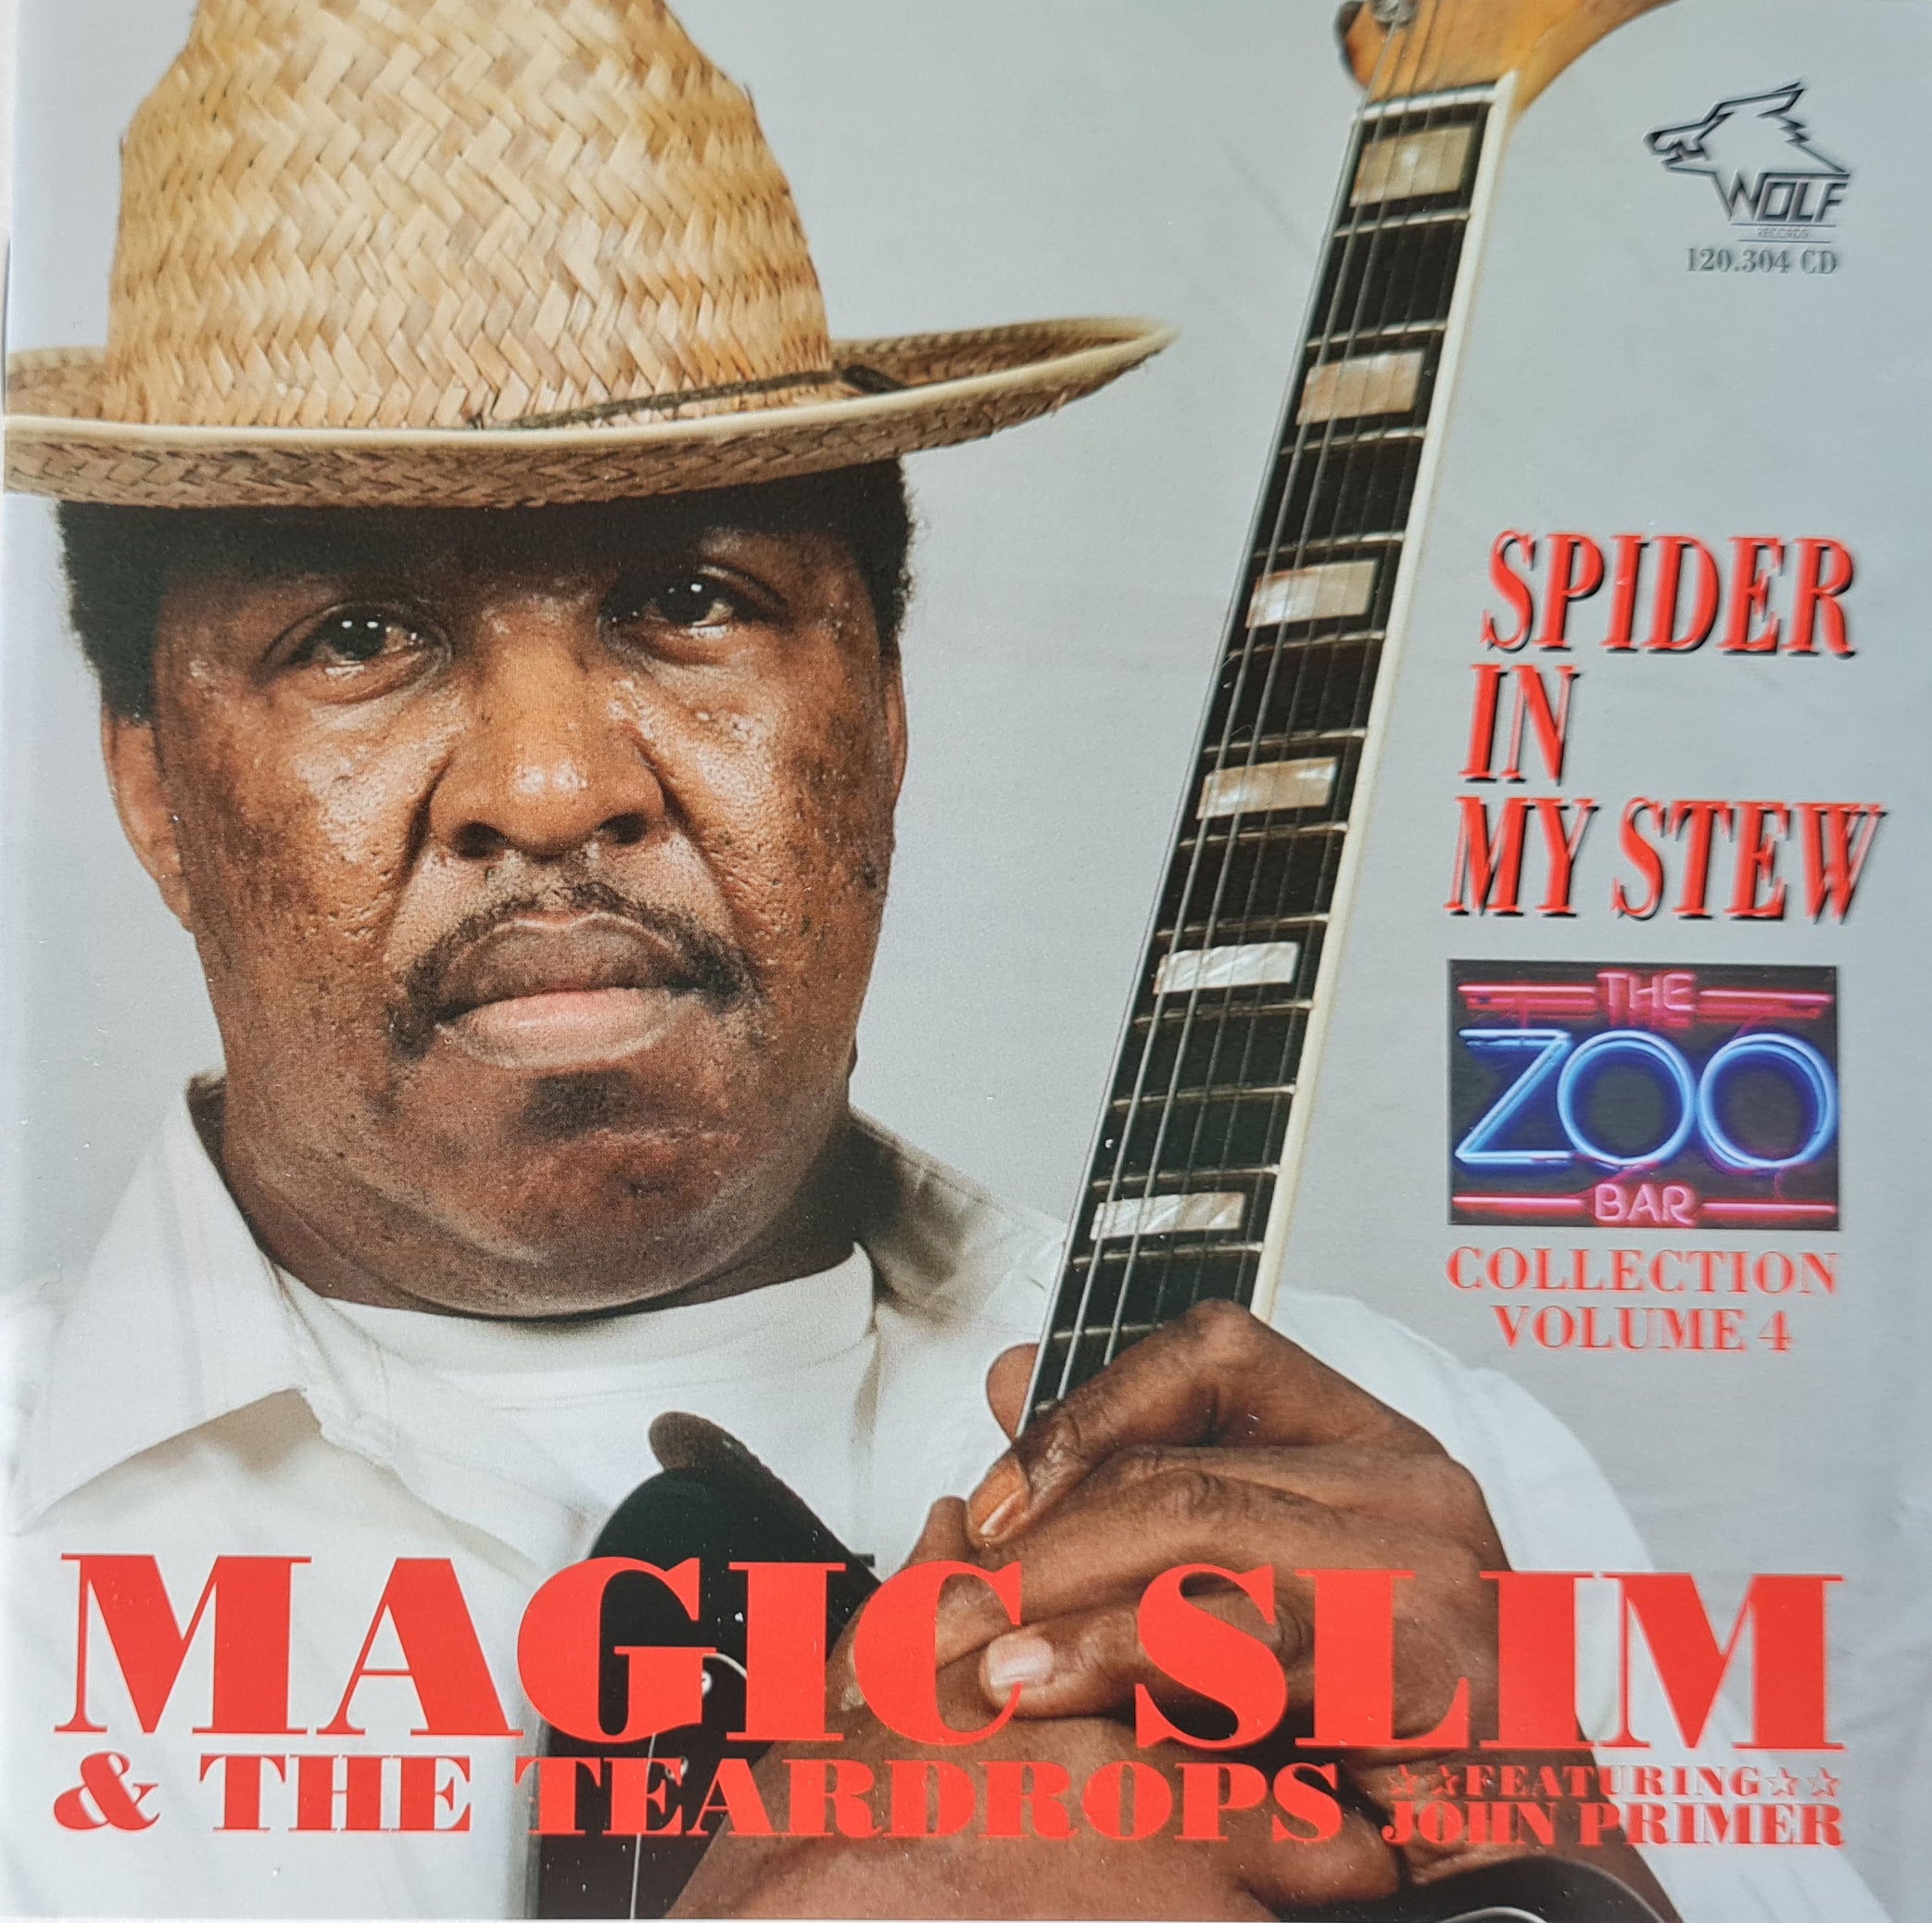 Magic Slim and the Teardrops - Spider in My Stew (CD)